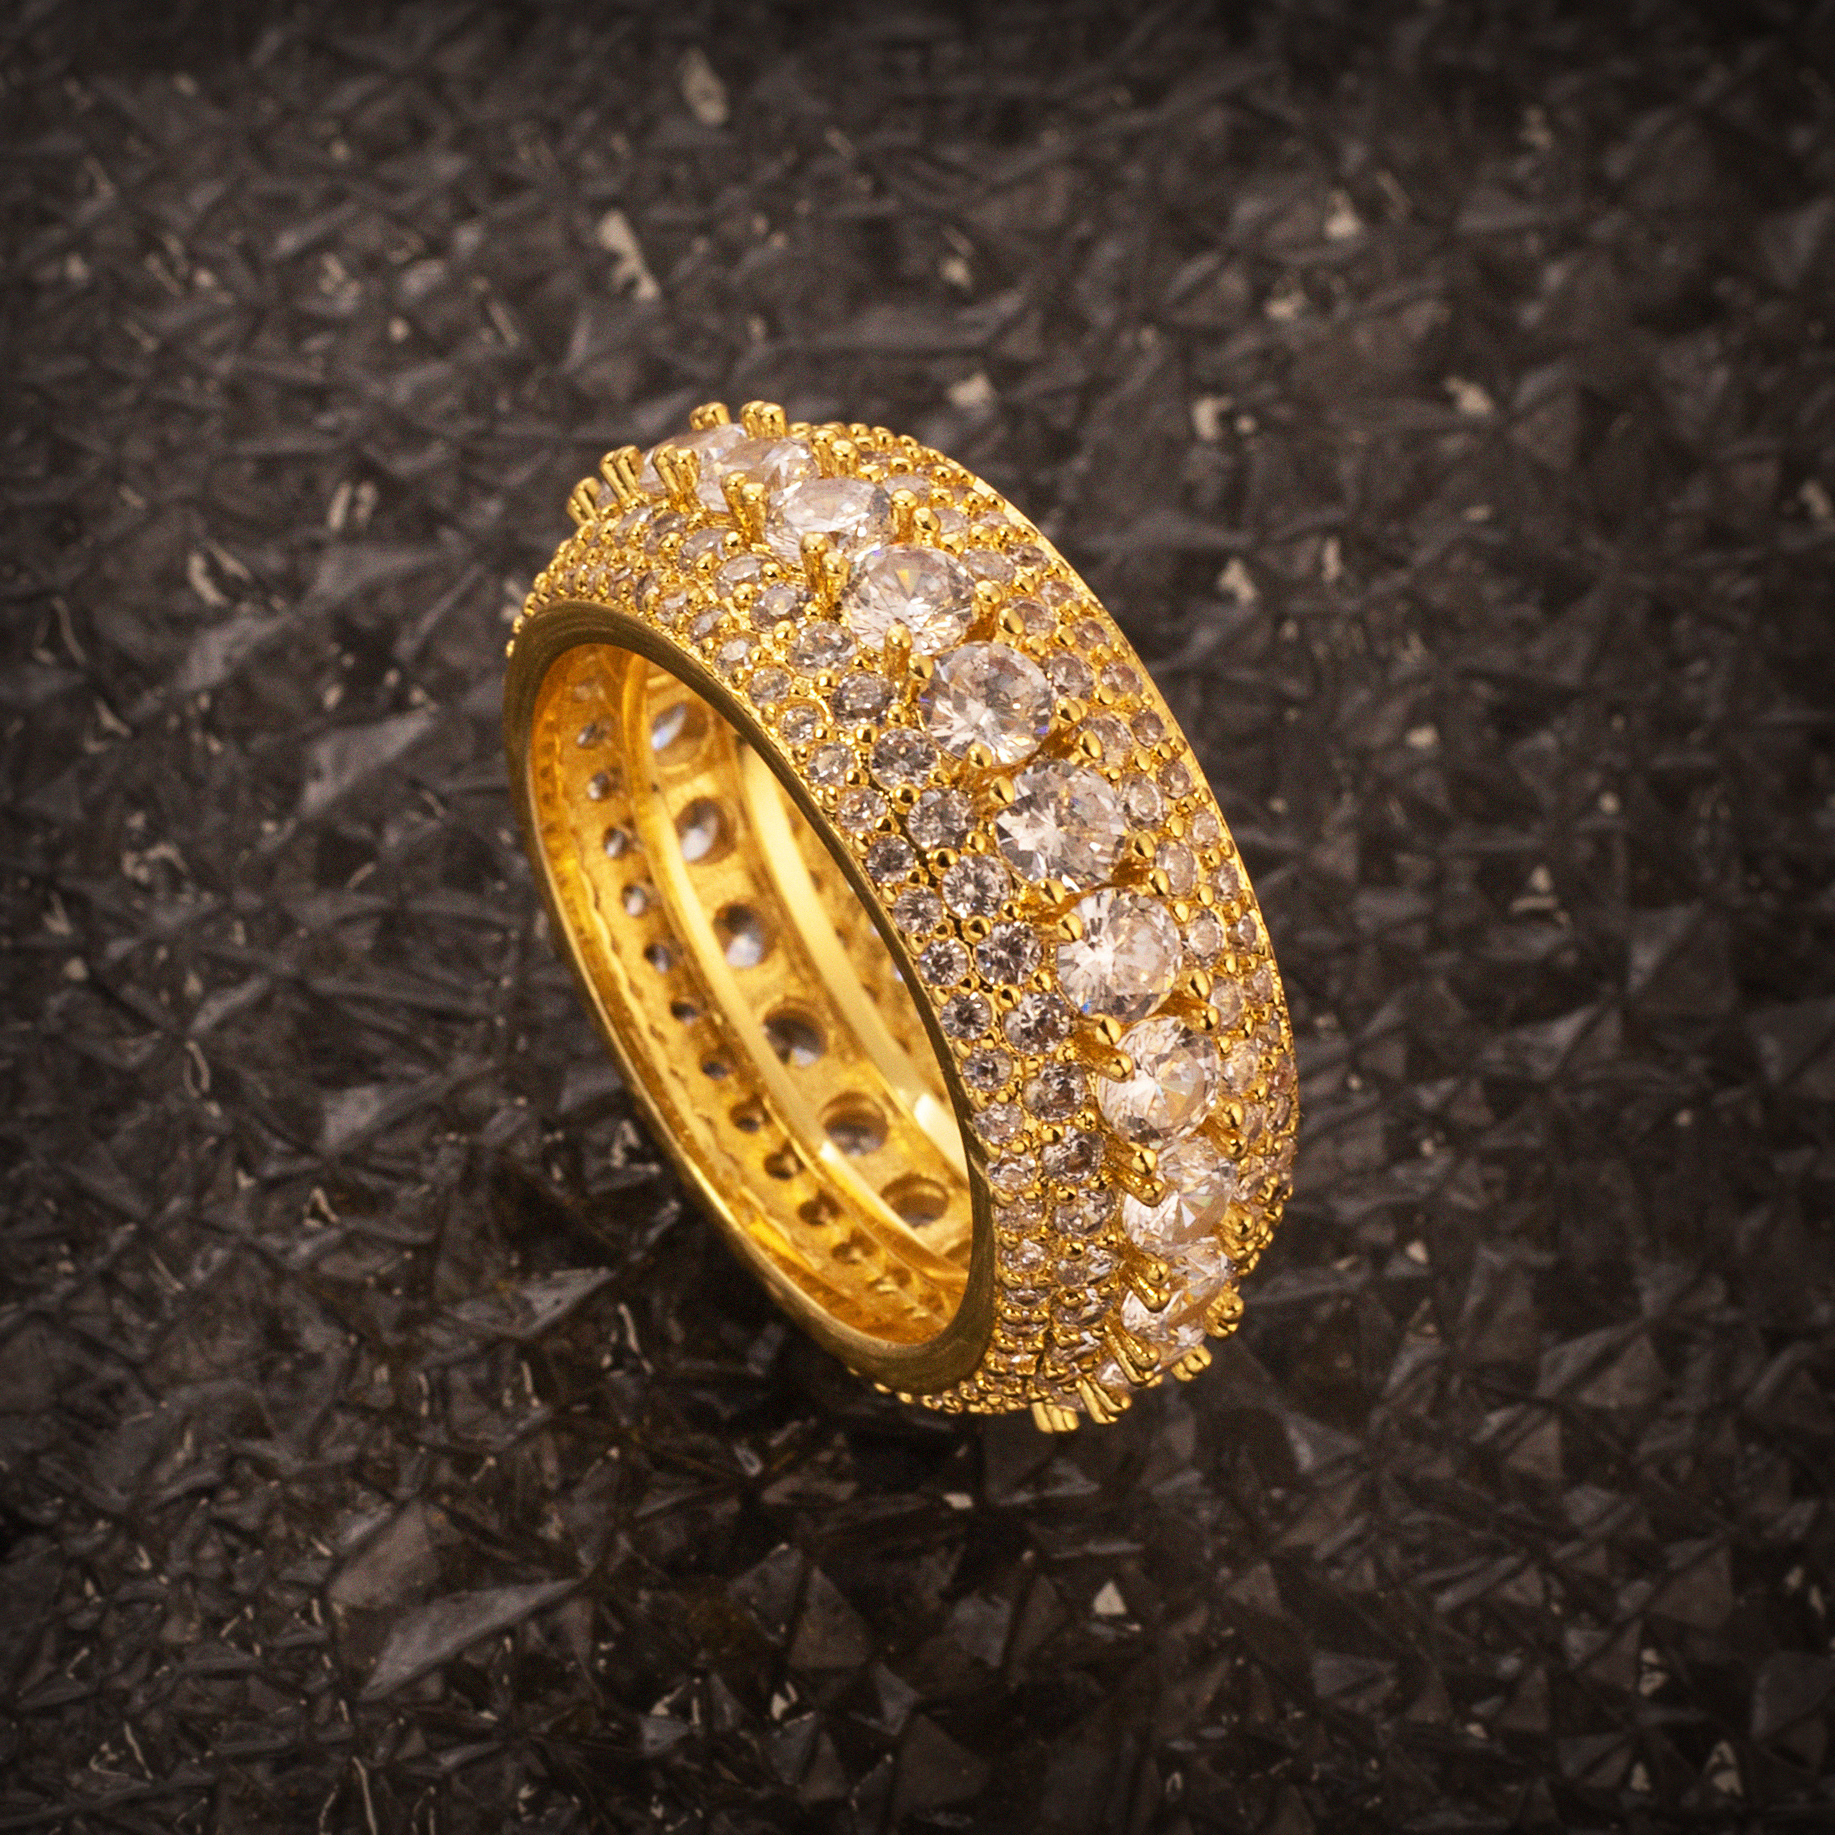 7-11 Iced Out Golden Silver Zircon Diamonds Ring Sulludd